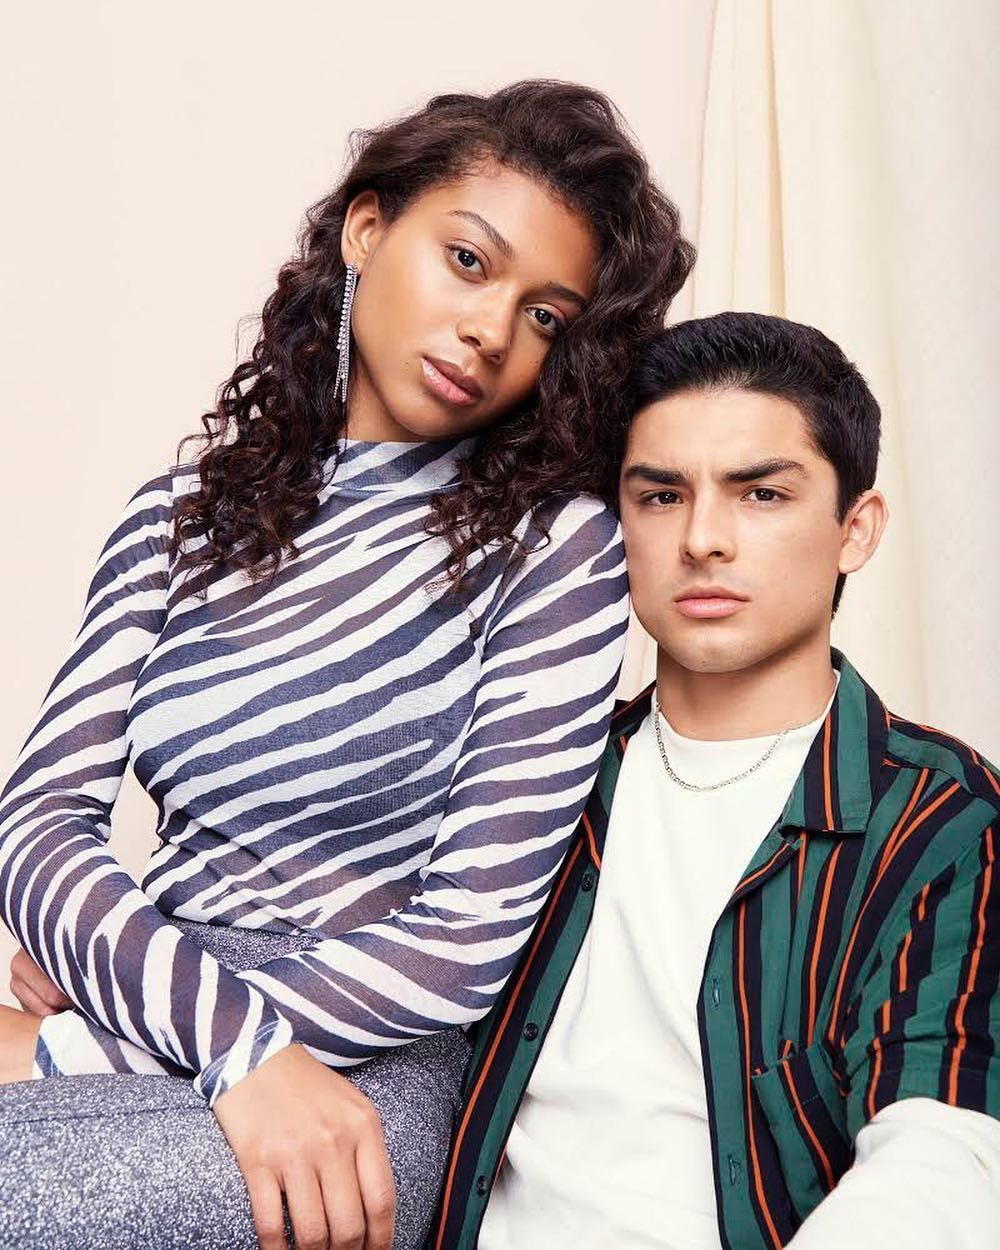 No one I'd rather shoot with ❤️Season 2 of On My Block out now